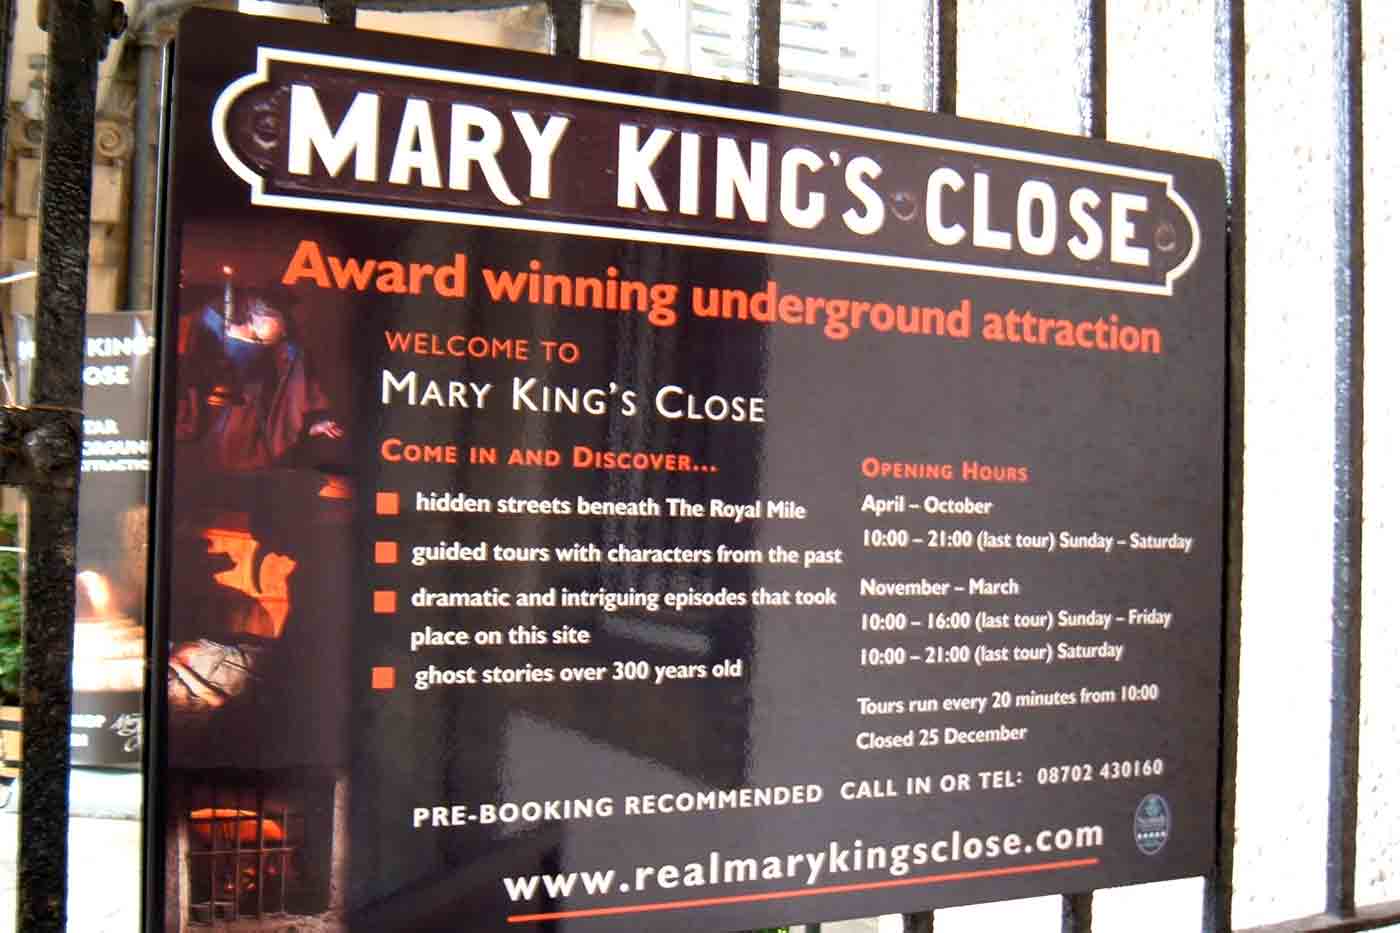 The Real Mary King’s Close